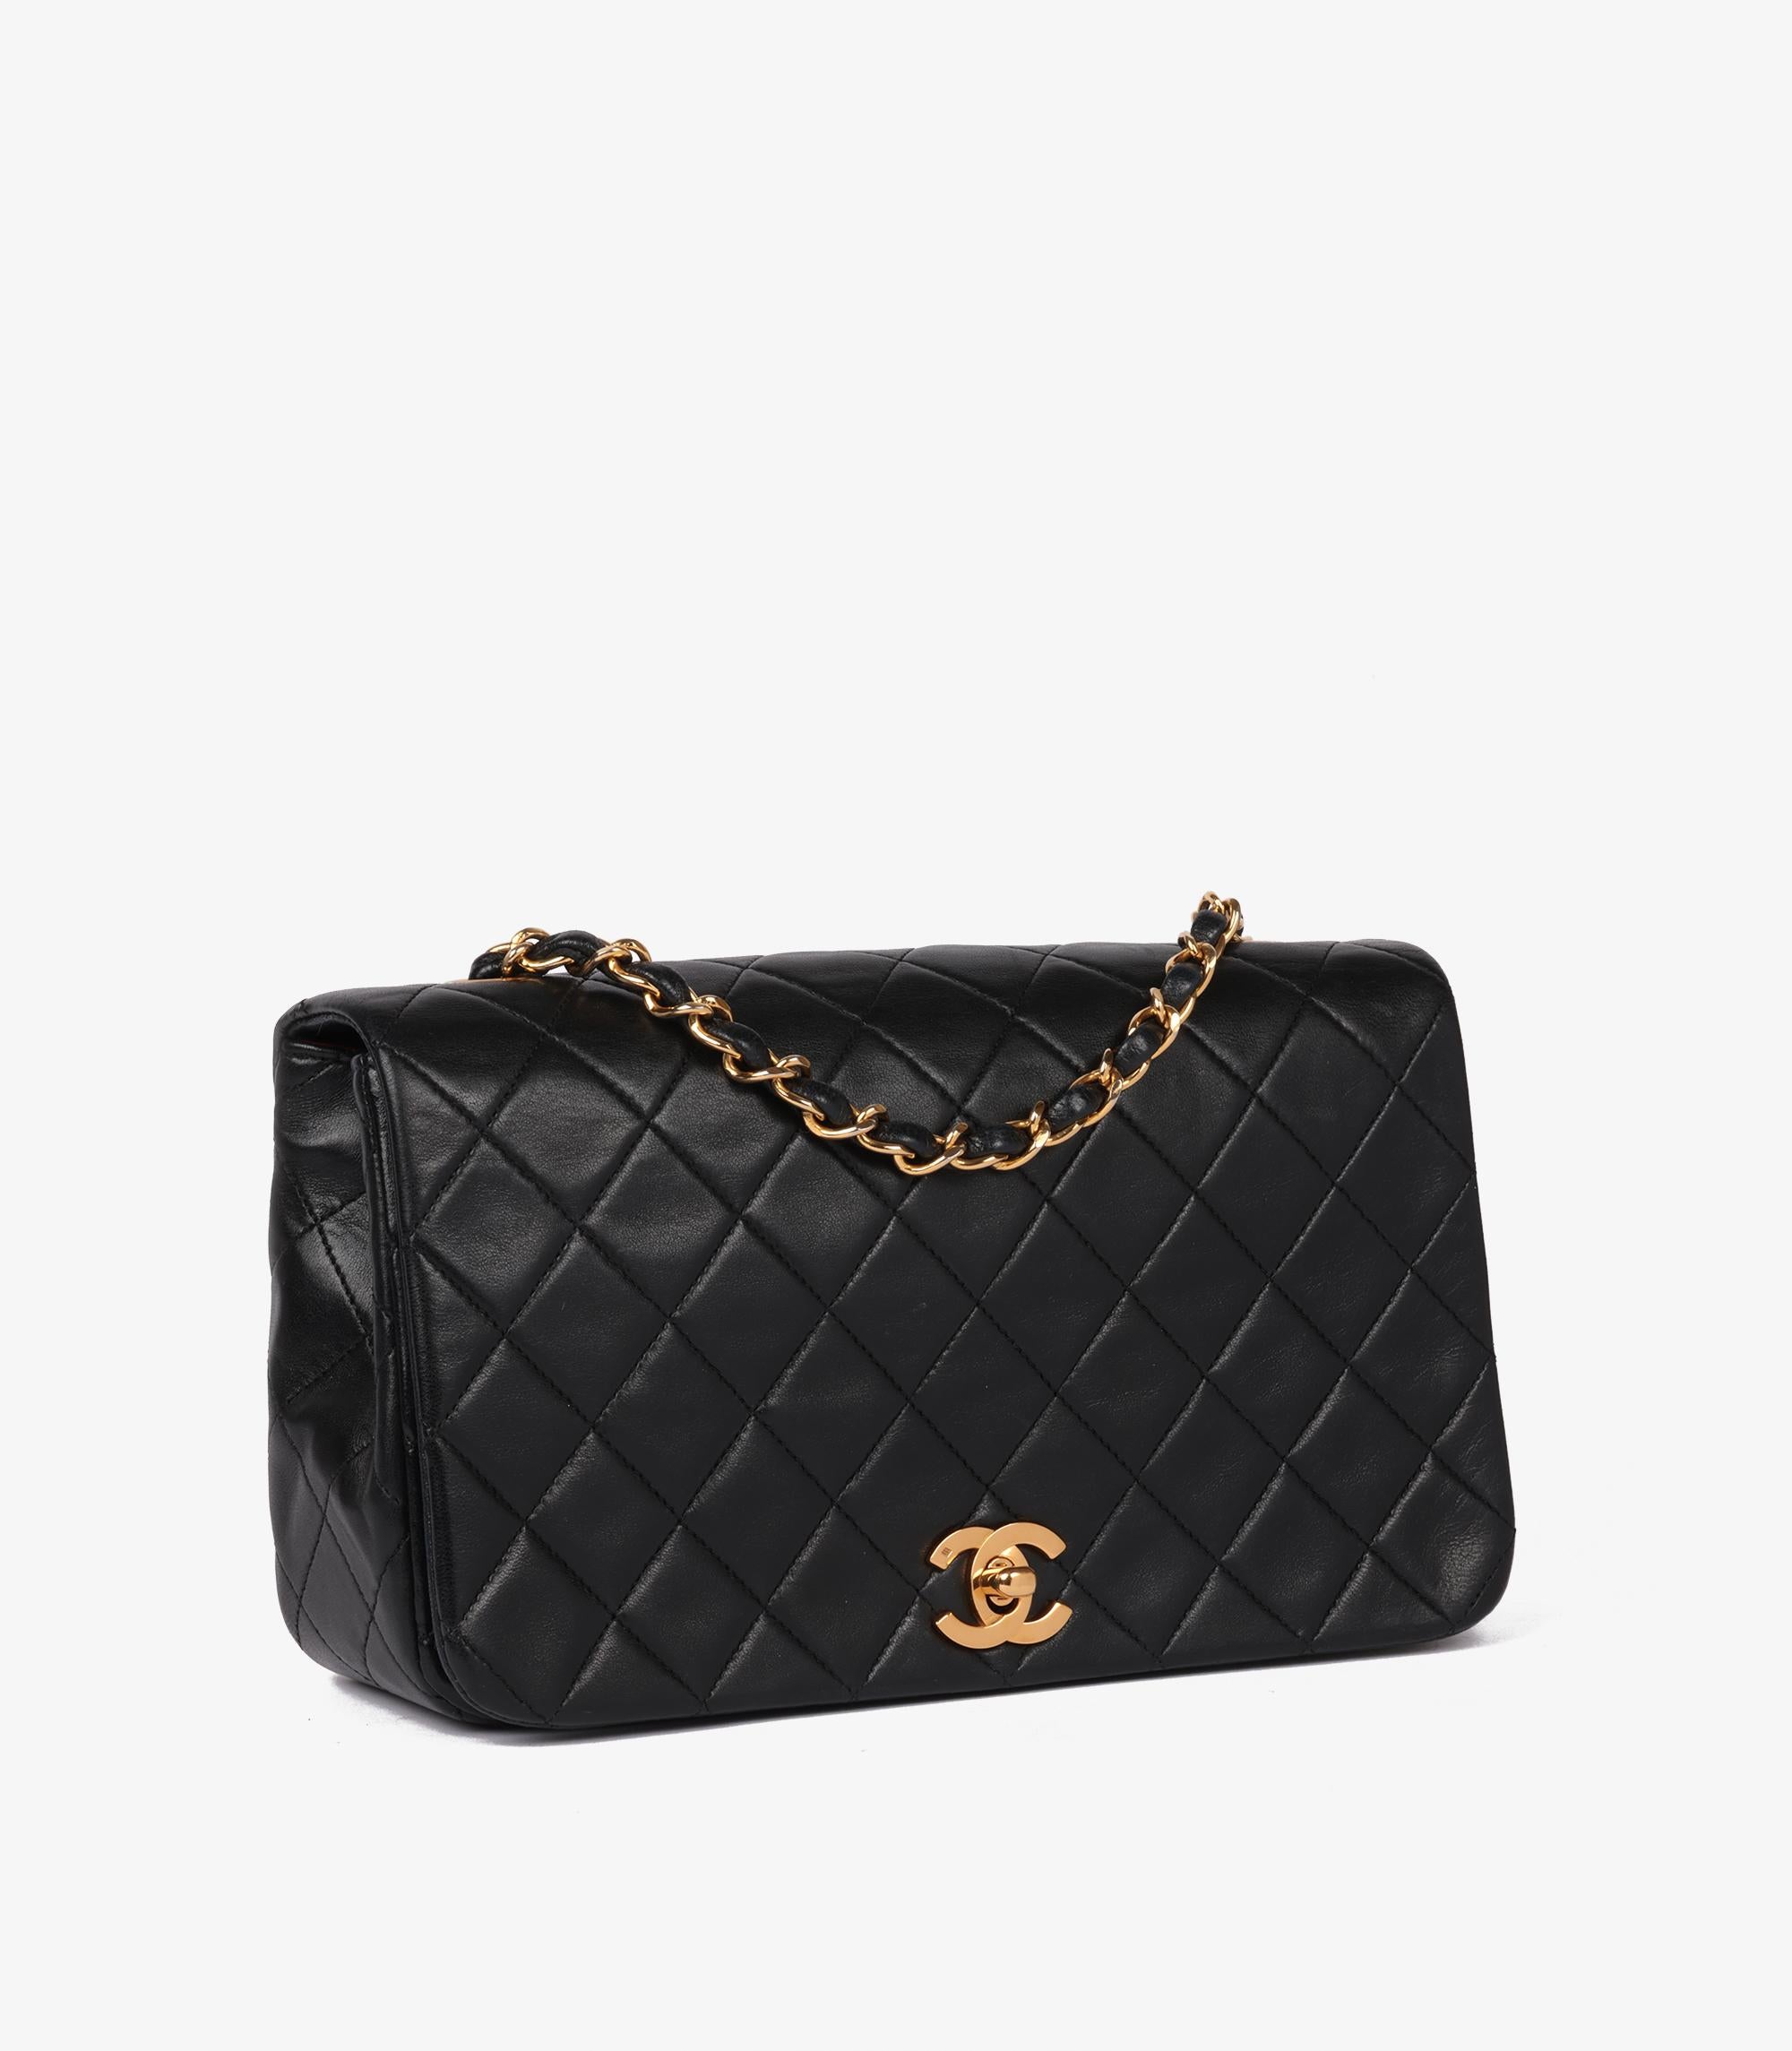 Chanel Black Quilted Lambskin Vintage Small Classic Single Full Flap Bag

Brand- Chanel
Model- Small Classic Single Full Flap Bag
Product Type- Crossbody, Shoulder
Serial Number- 11*****
Age- Circa 1989
Accompanied By- Authenticity Card, Chanel Dust